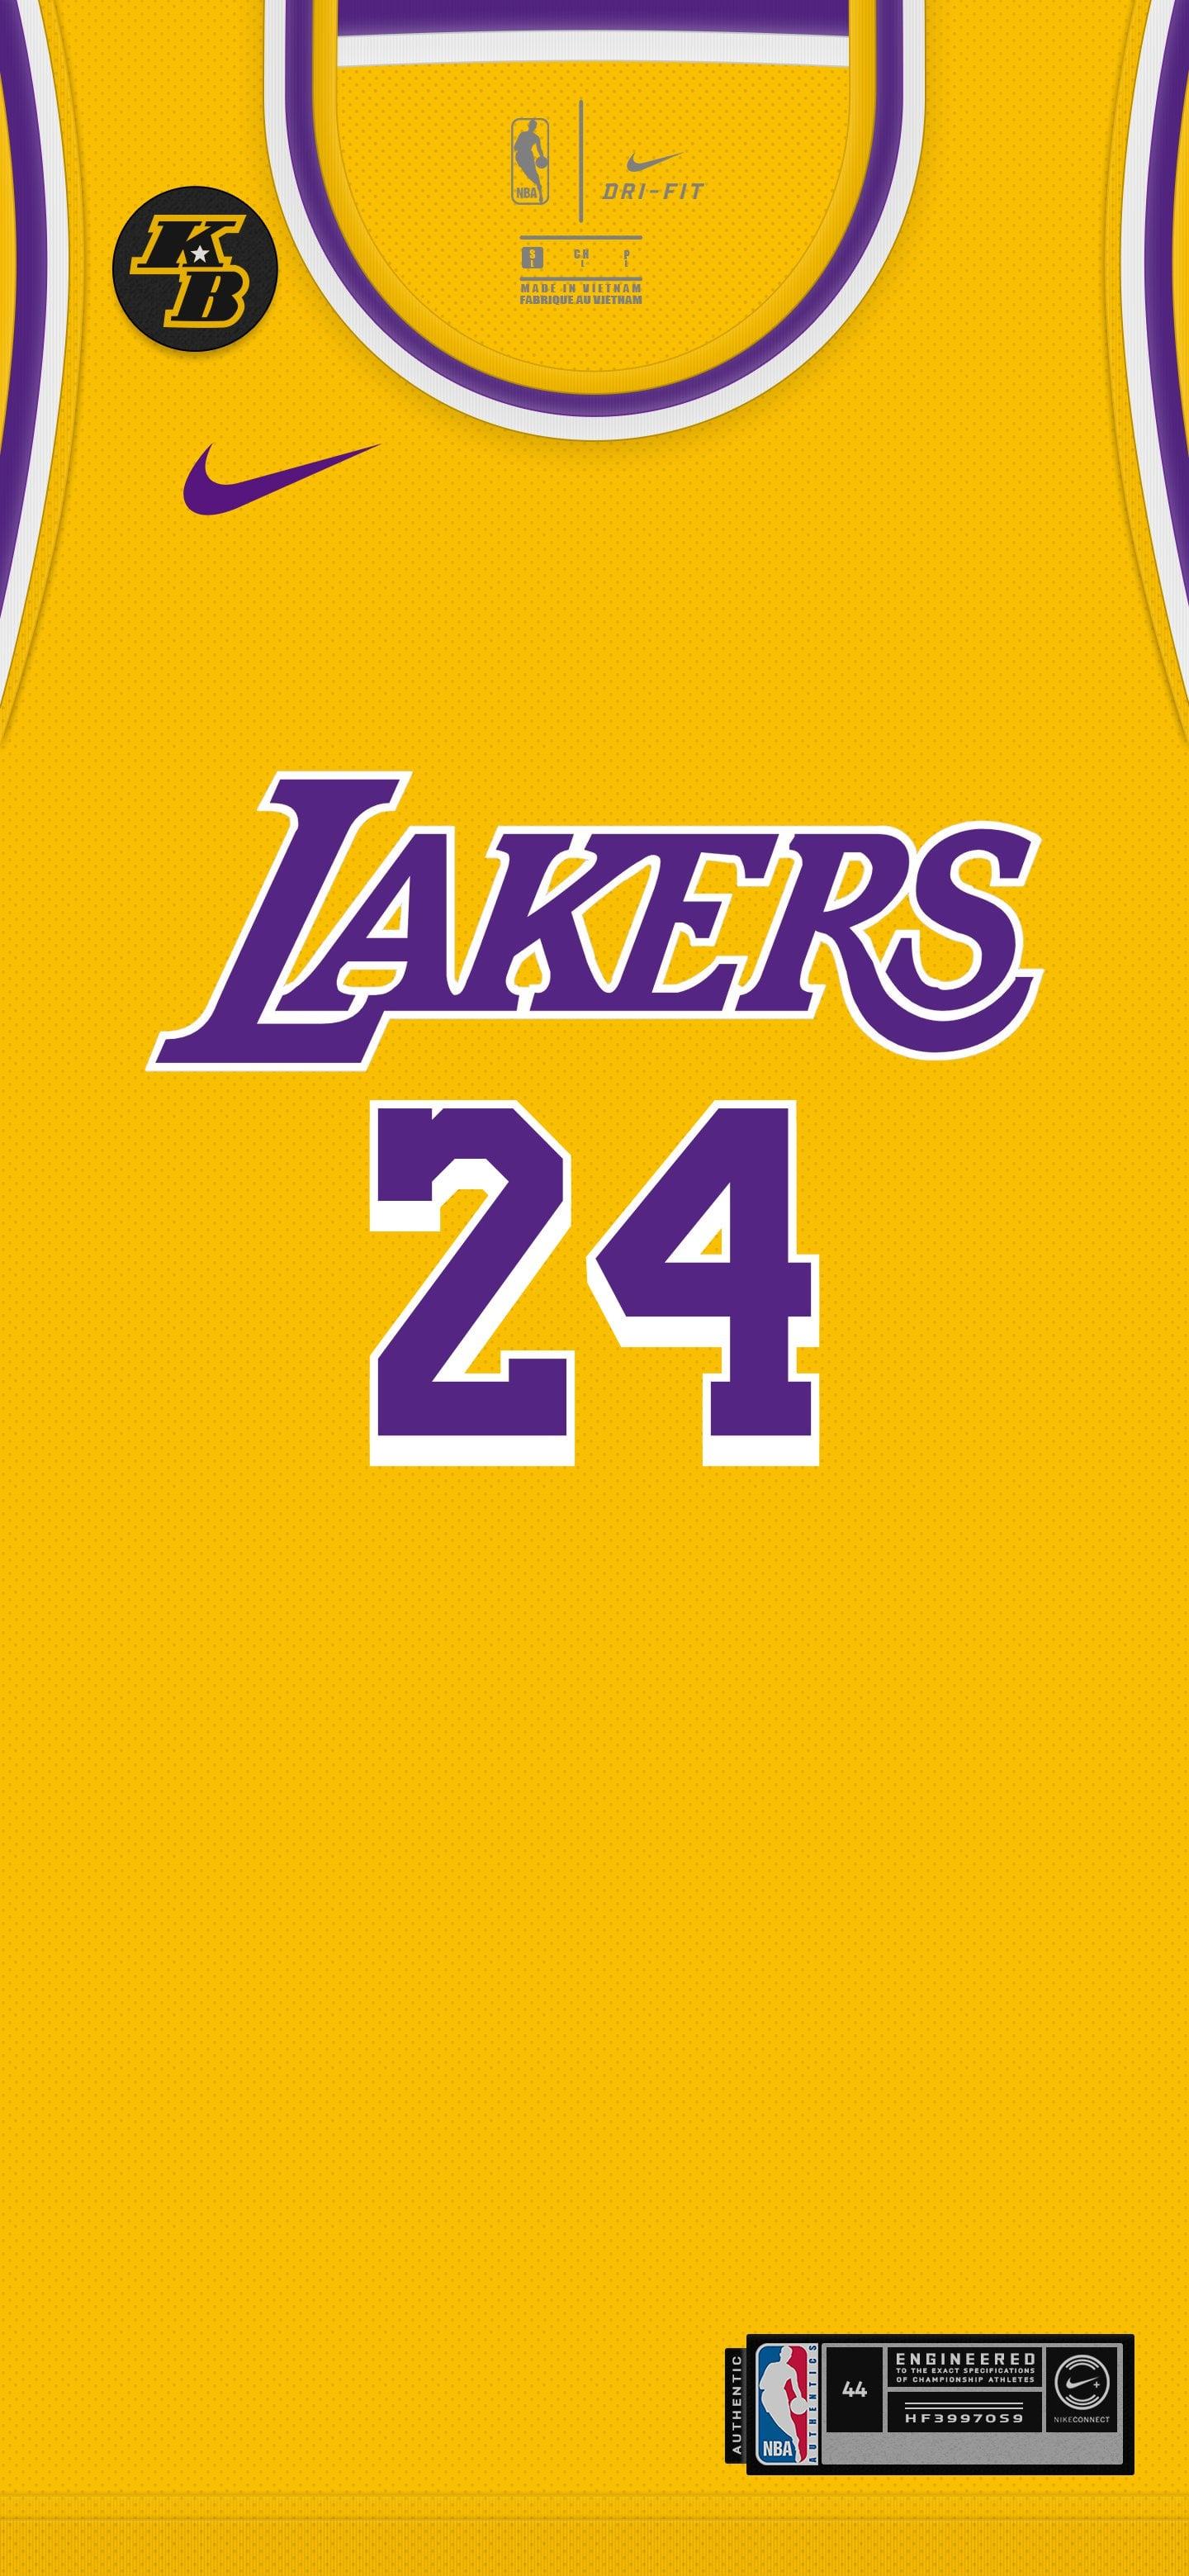 Kobe Mobile Jersey Wallpaper Icon And Statement R Lakers